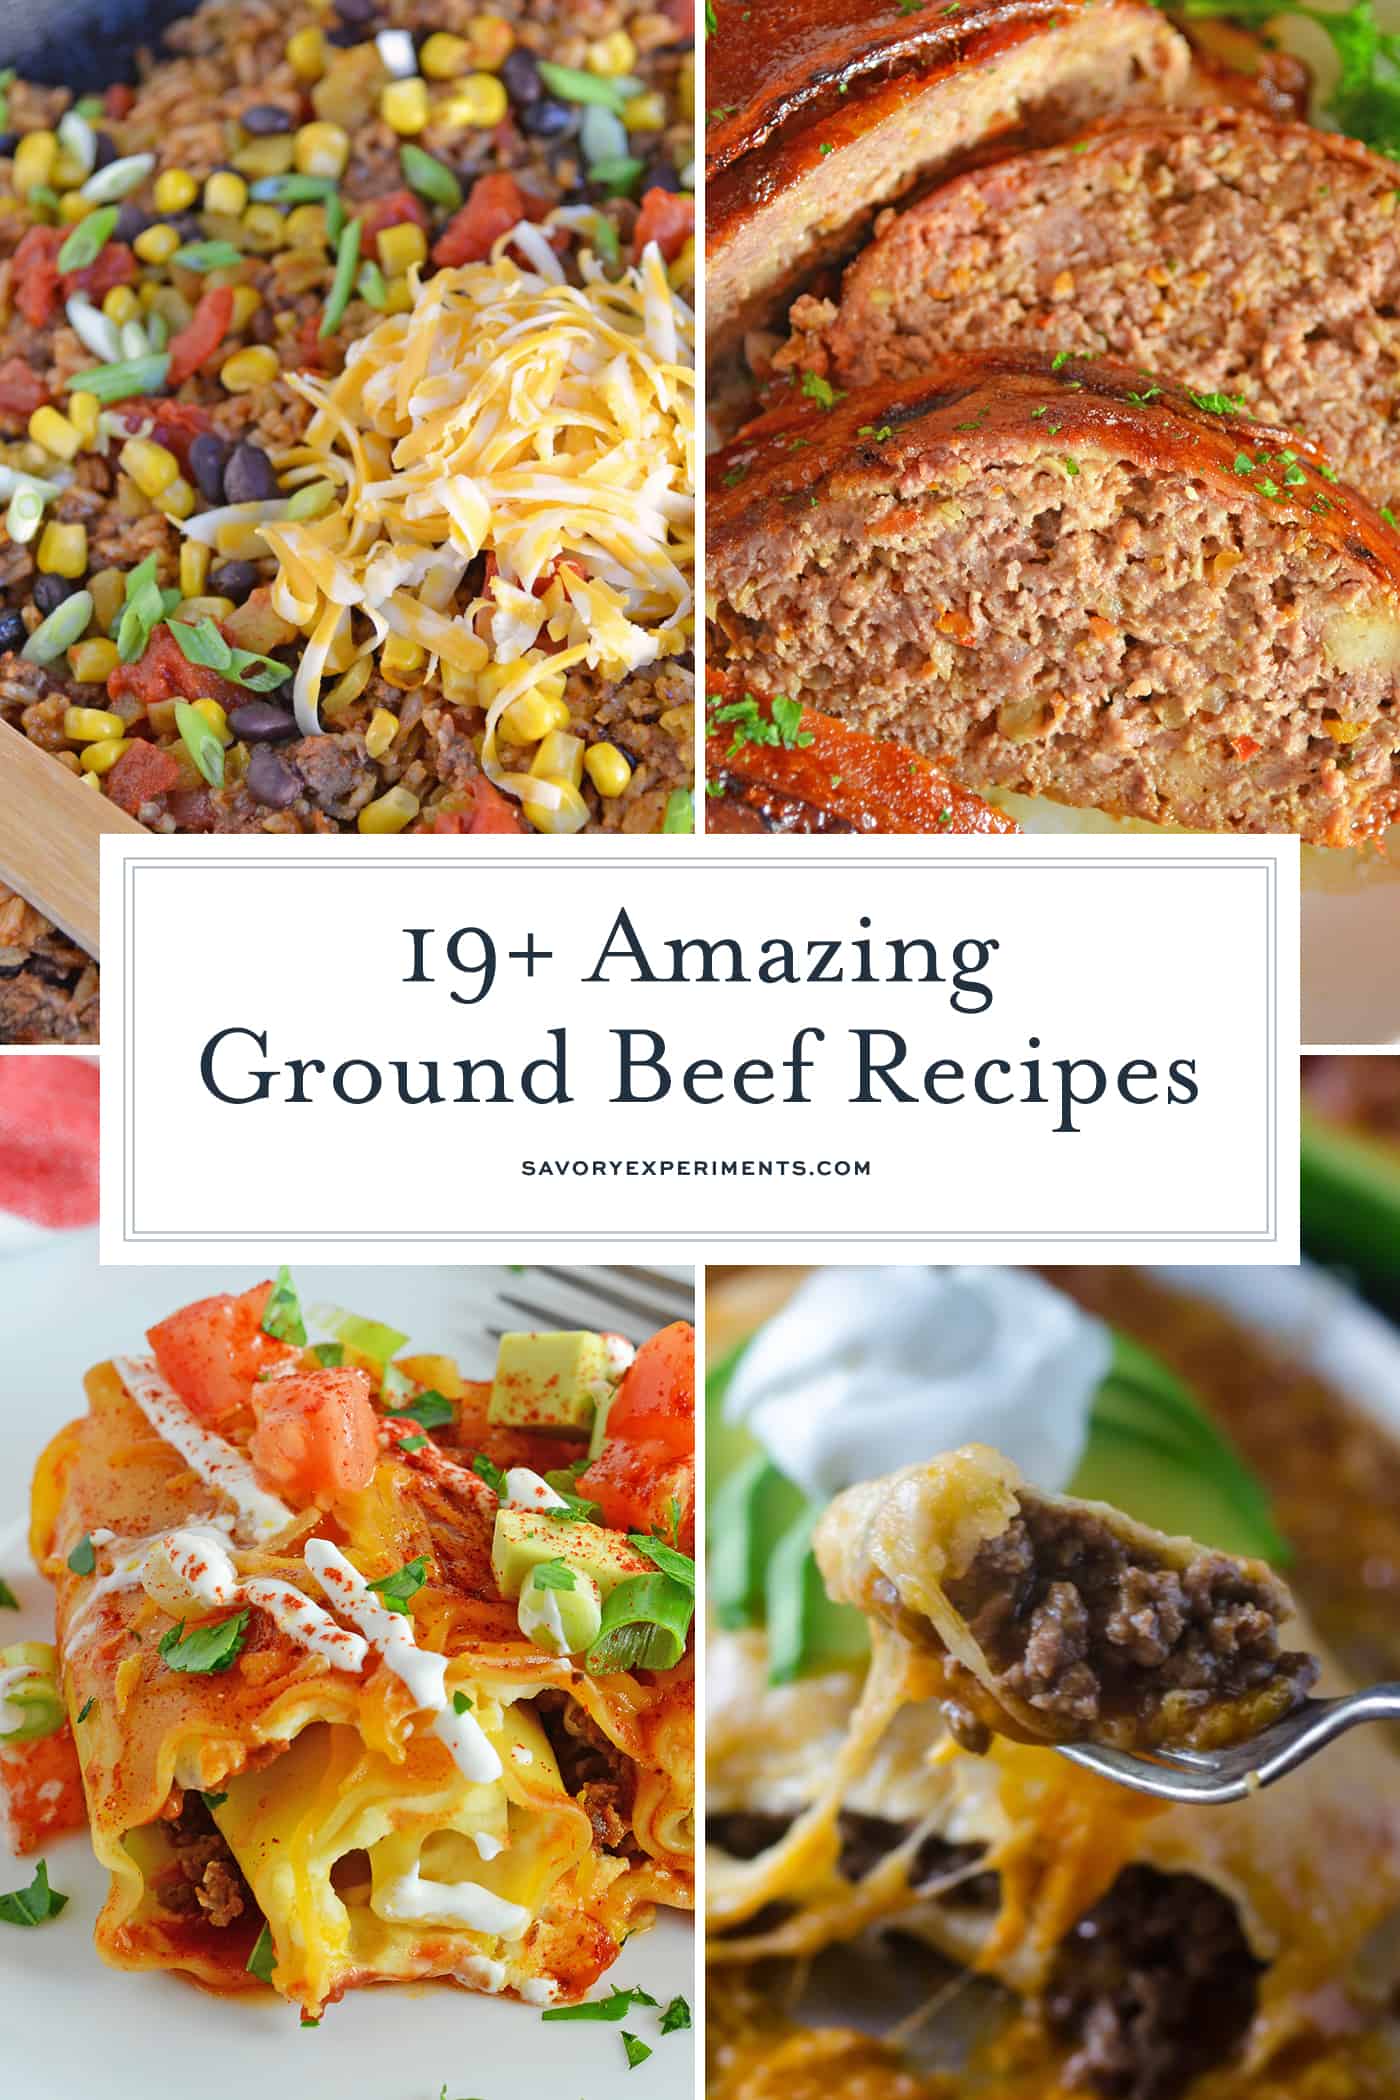 This collection of easy ground beef recipes provides a cheap solution for dinner! From a casserole to pasta and everything in between, these are the best ground beef recipes. #mealswithgroundbeef #recipeswithgroundbeef #easygroundbeefrecipes www.savoryexperiments.com